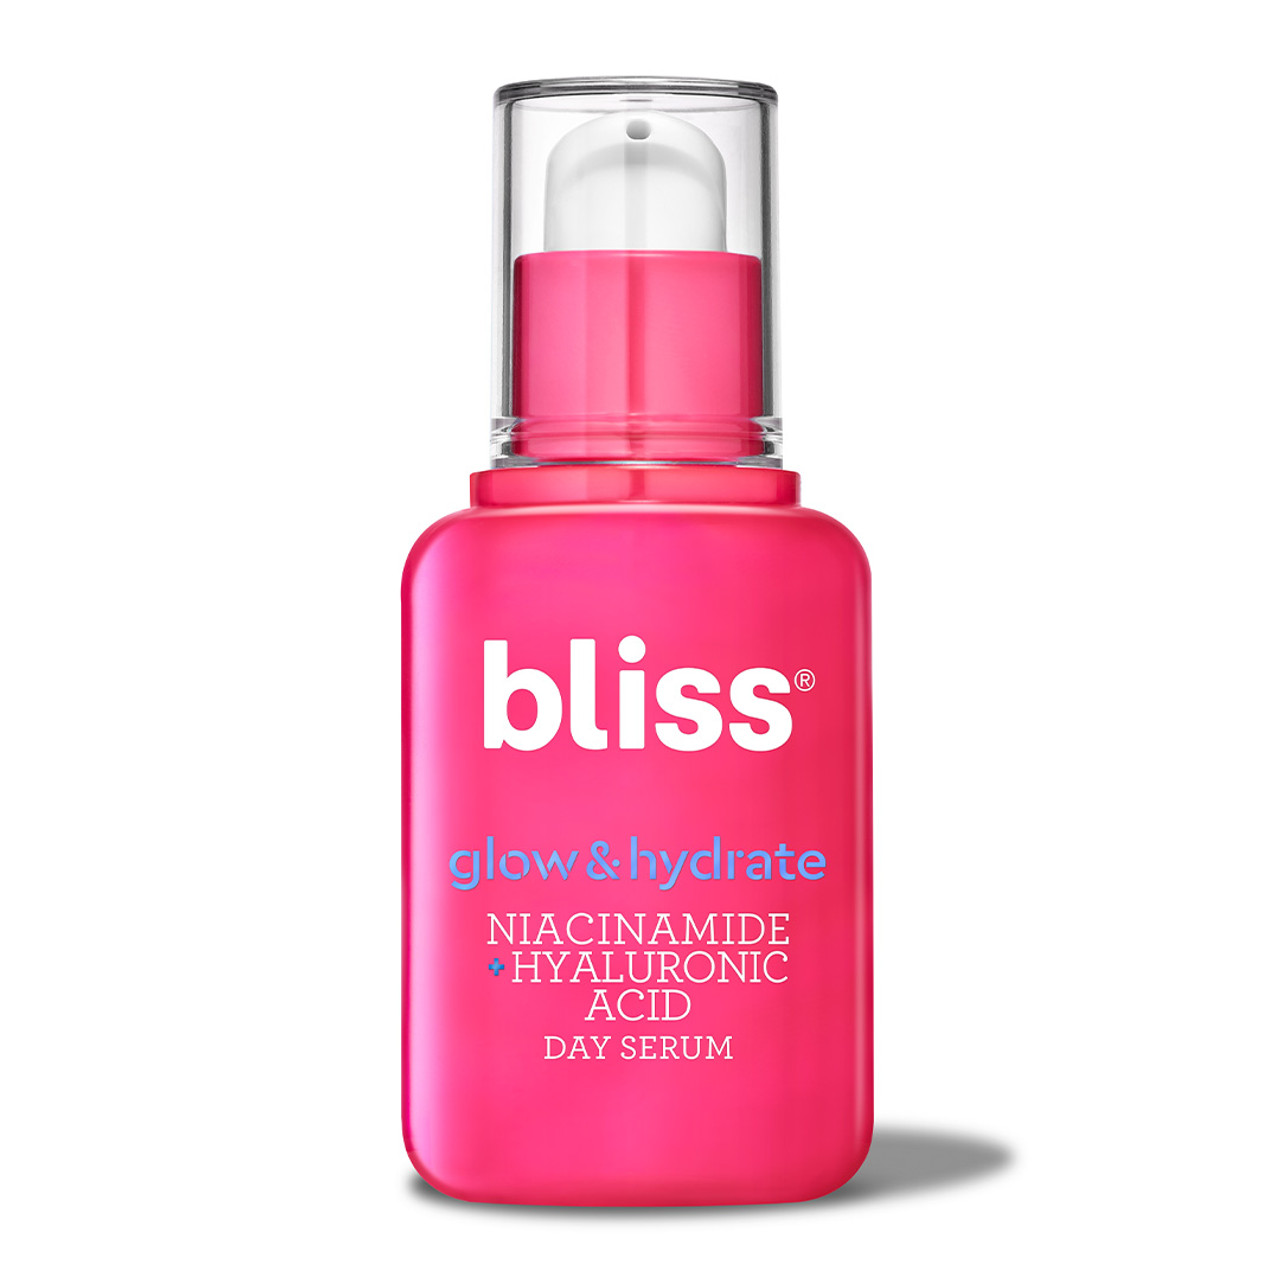 Bliss What a Melon Replenishing Watermelon Toner with Witch Hazel and Willow Bark